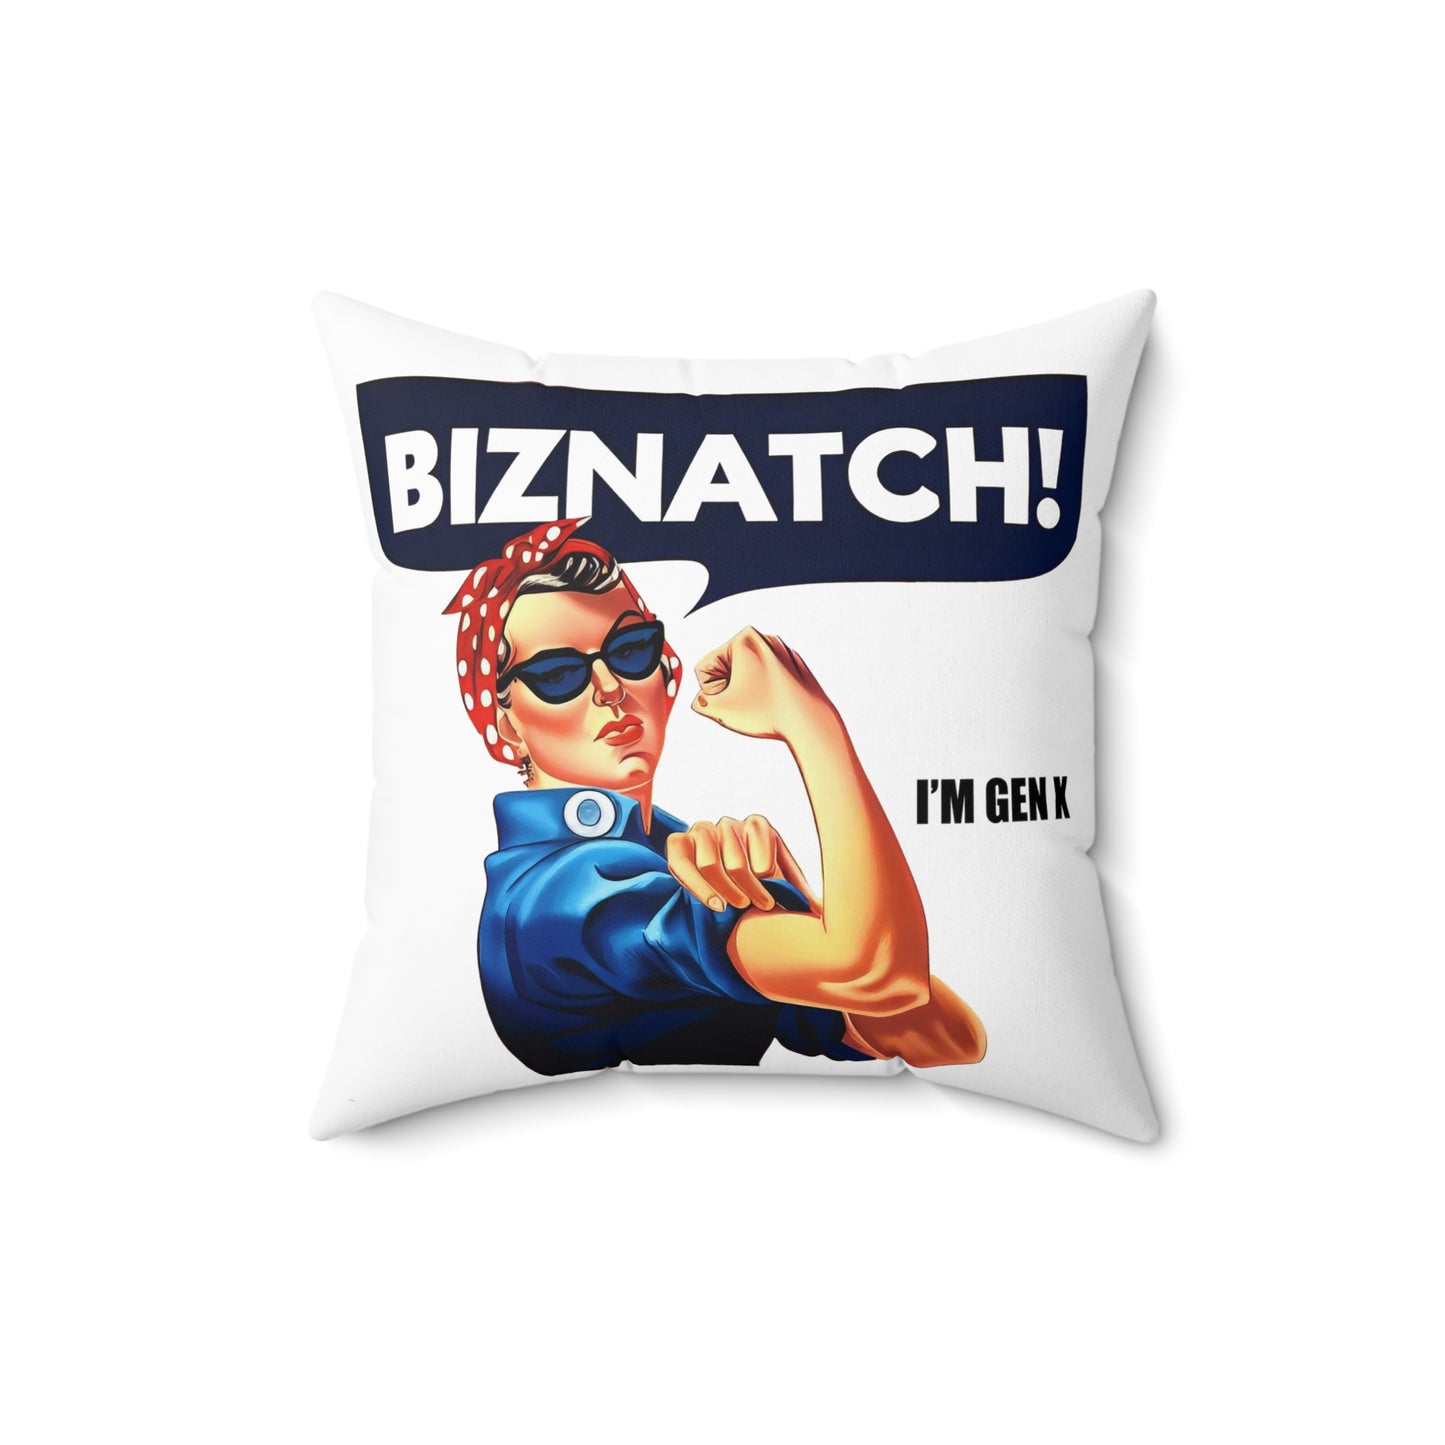 Show off your Gen X pride with this bold and empowering pillow featuring Rosie the Riveter and the phrase "Biznatch! I’m Gen X".